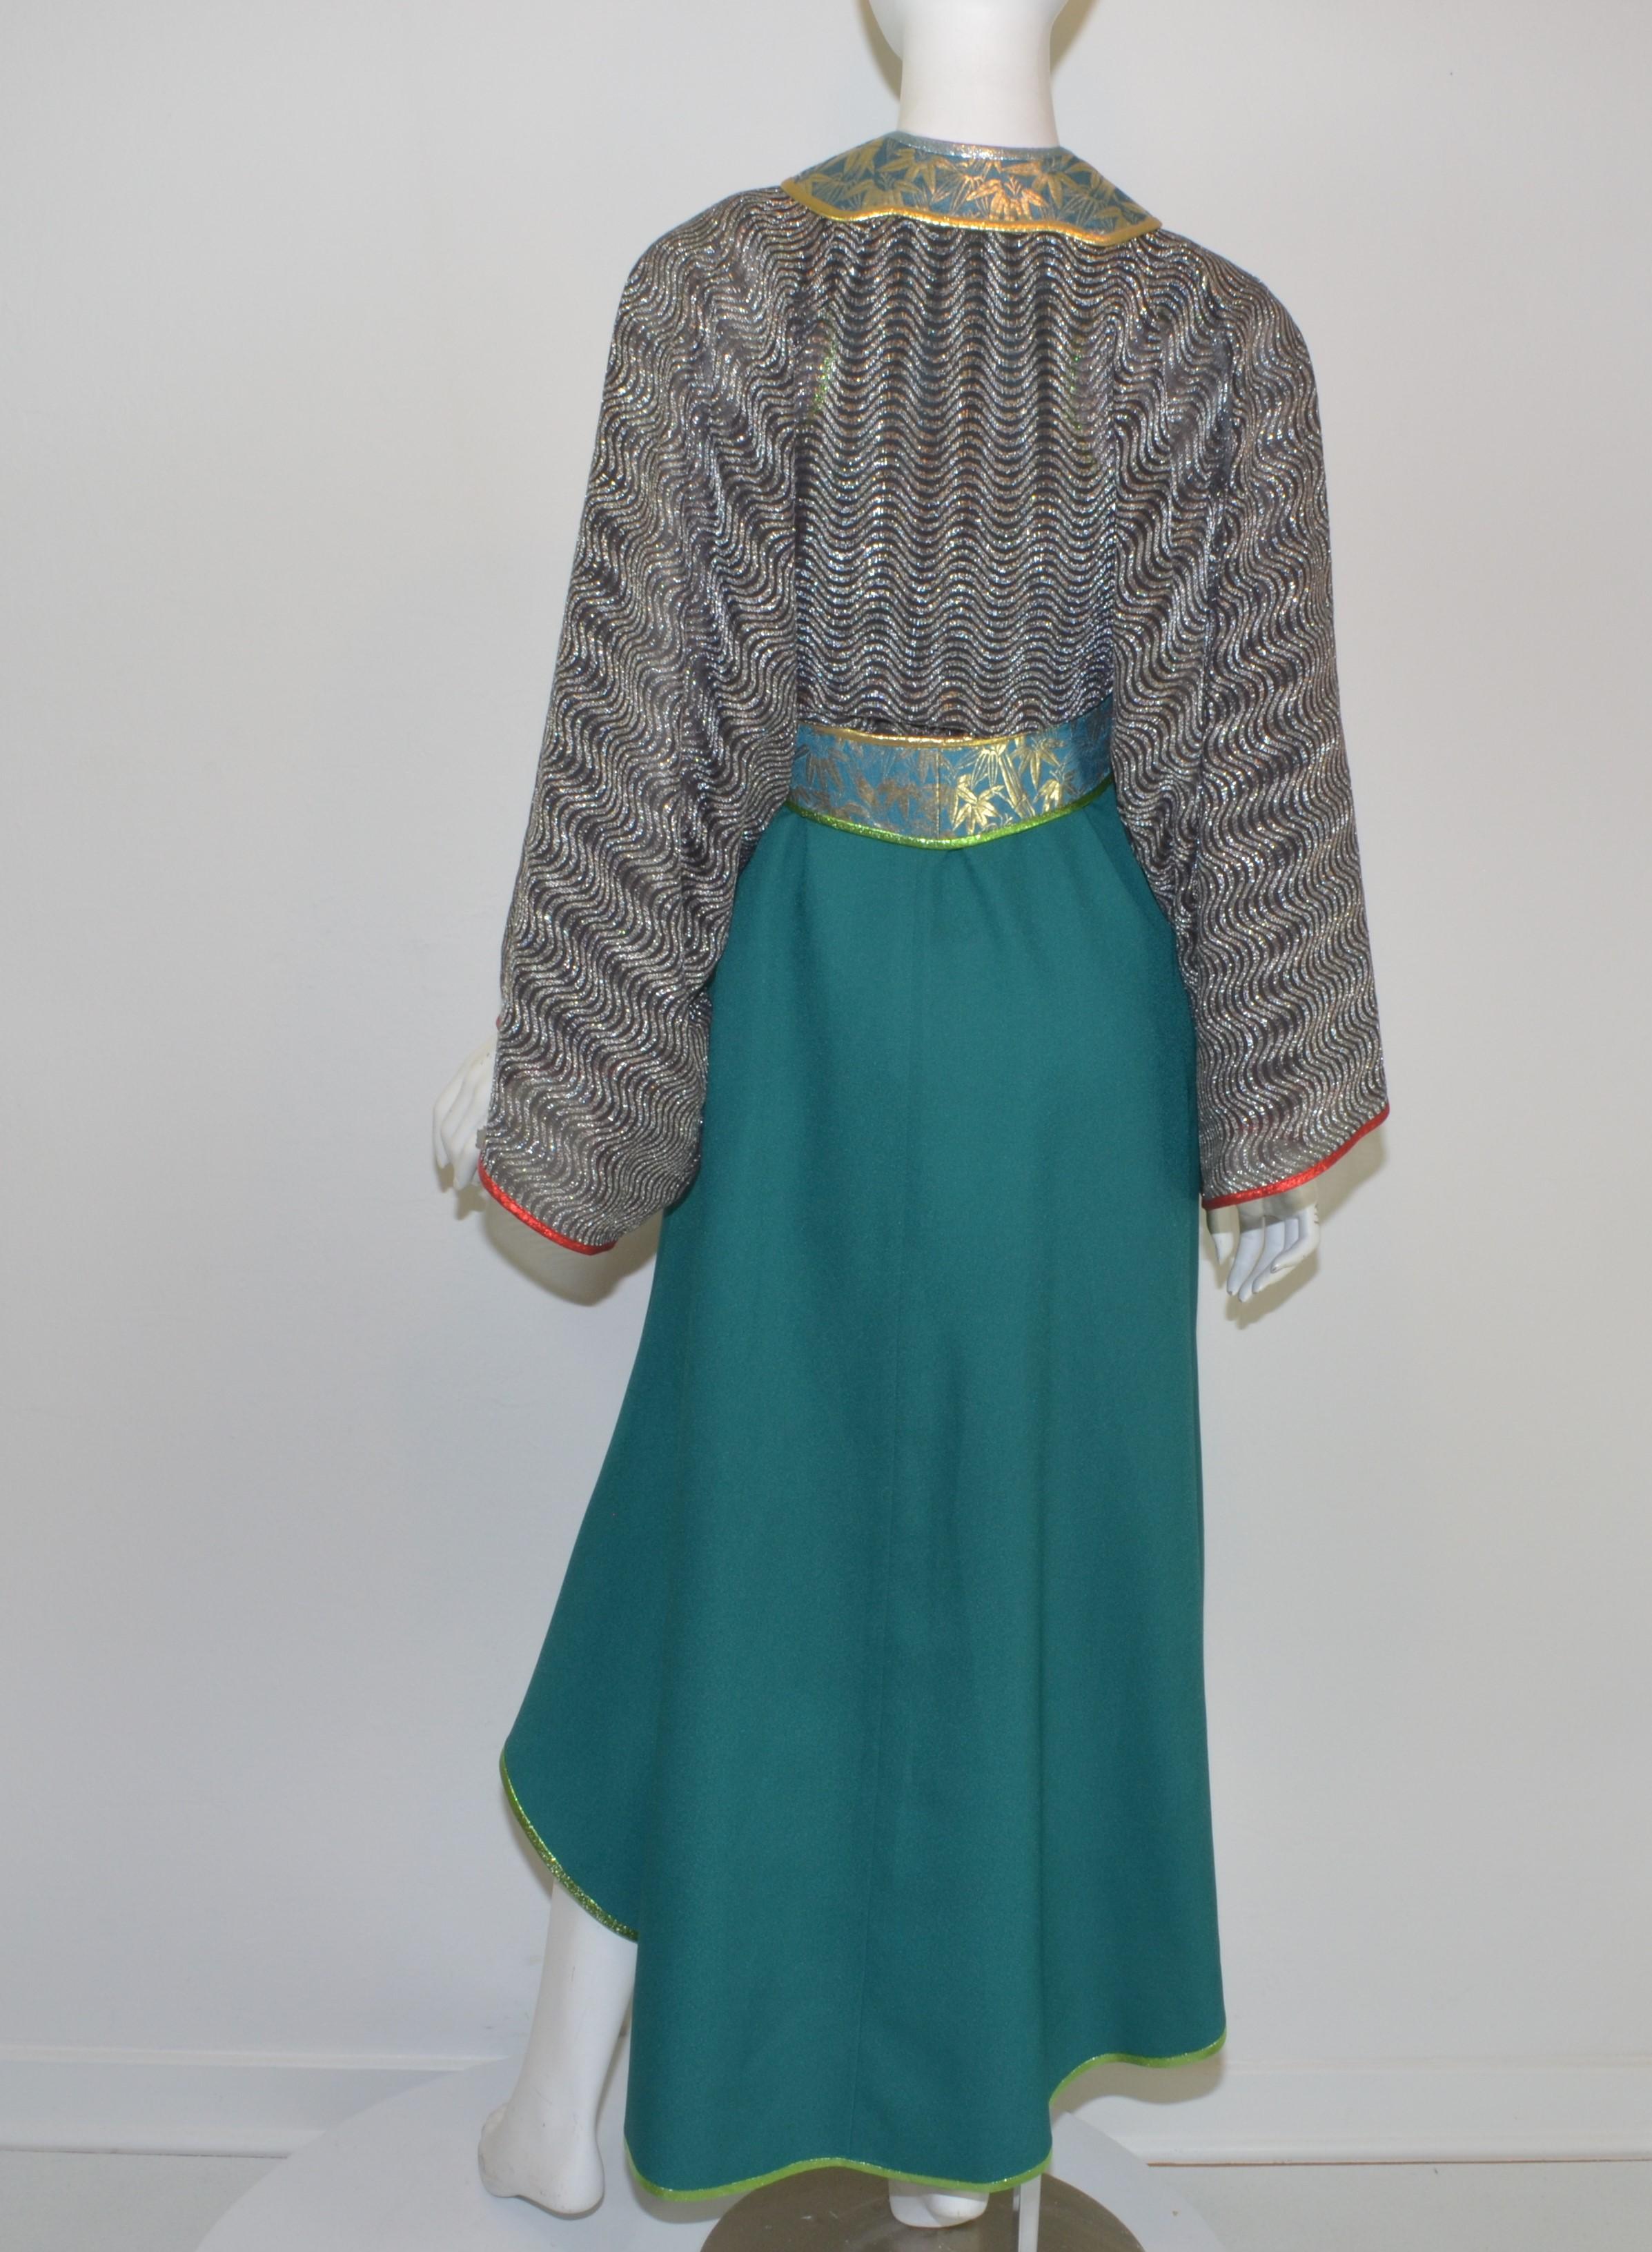 Kaisik Wong, Obiko Art to Wear Ensemble with Jacket & Dress In Excellent Condition For Sale In Carmel, CA